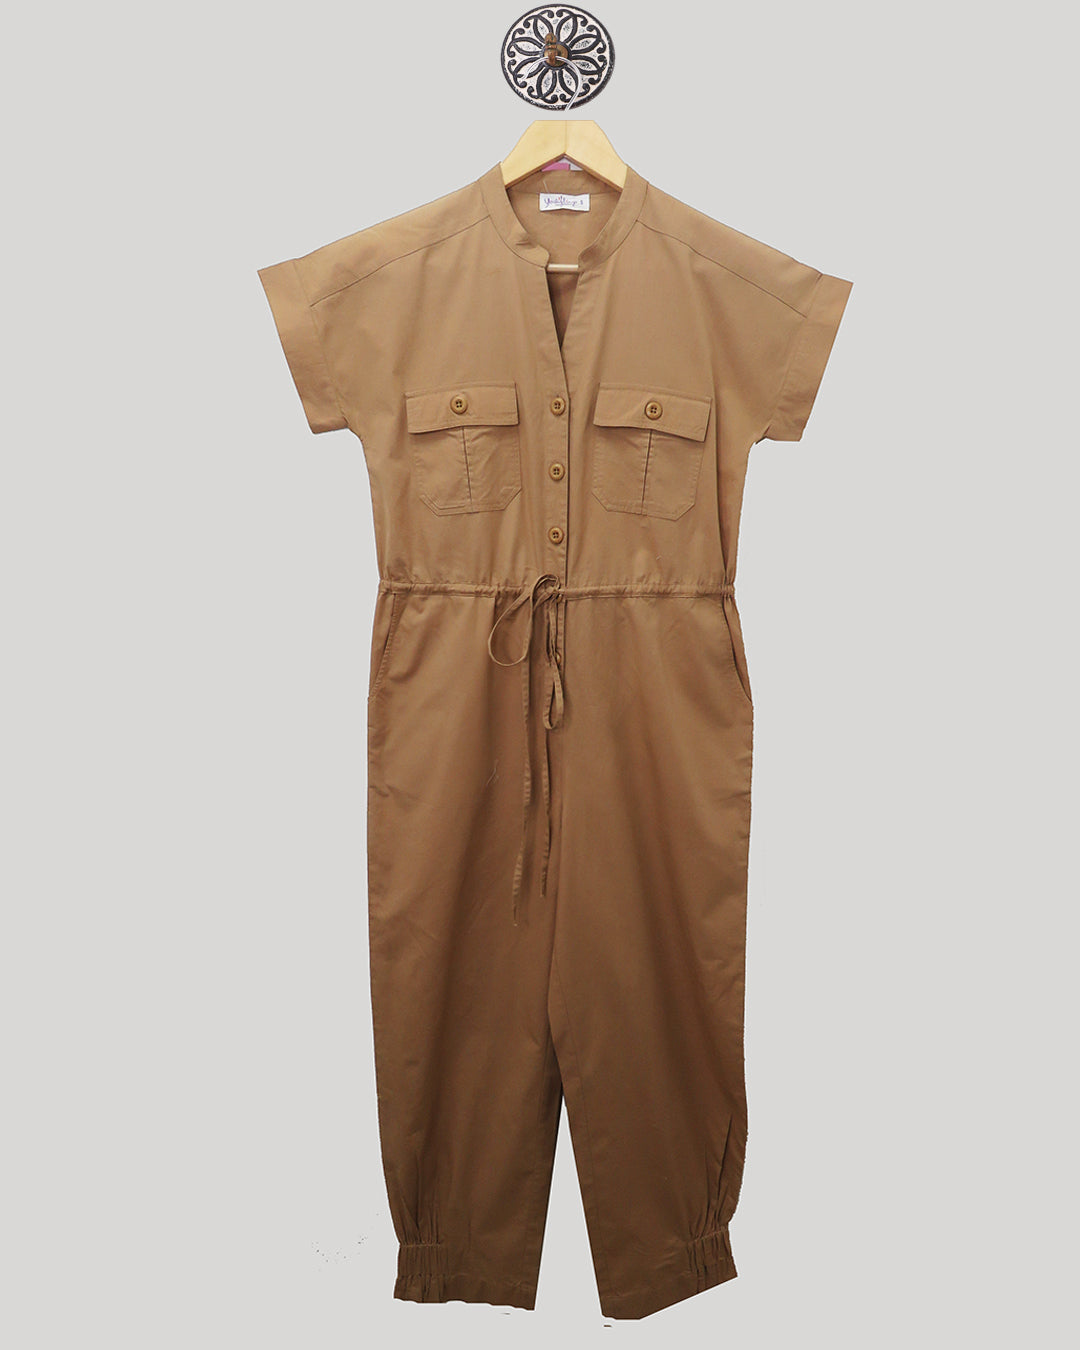 KHAKI JUMPSUIT WITH FLAP POCKET,ADJUSTABLE WAIST AND TIED DETAIL